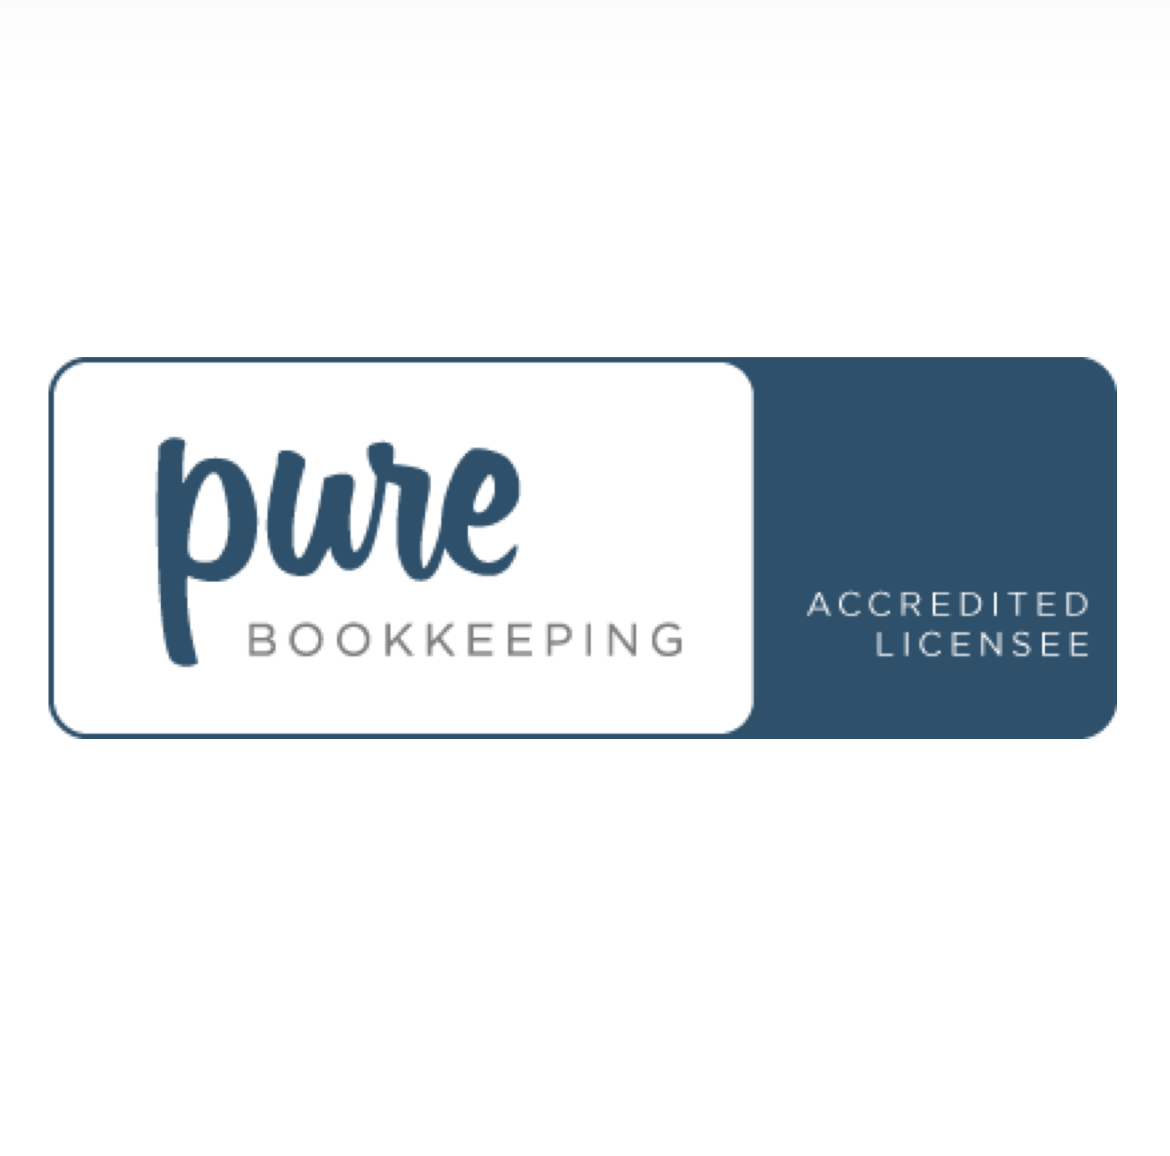 Pure bookkeeping for excellent bookkeeper efficiency and effect.